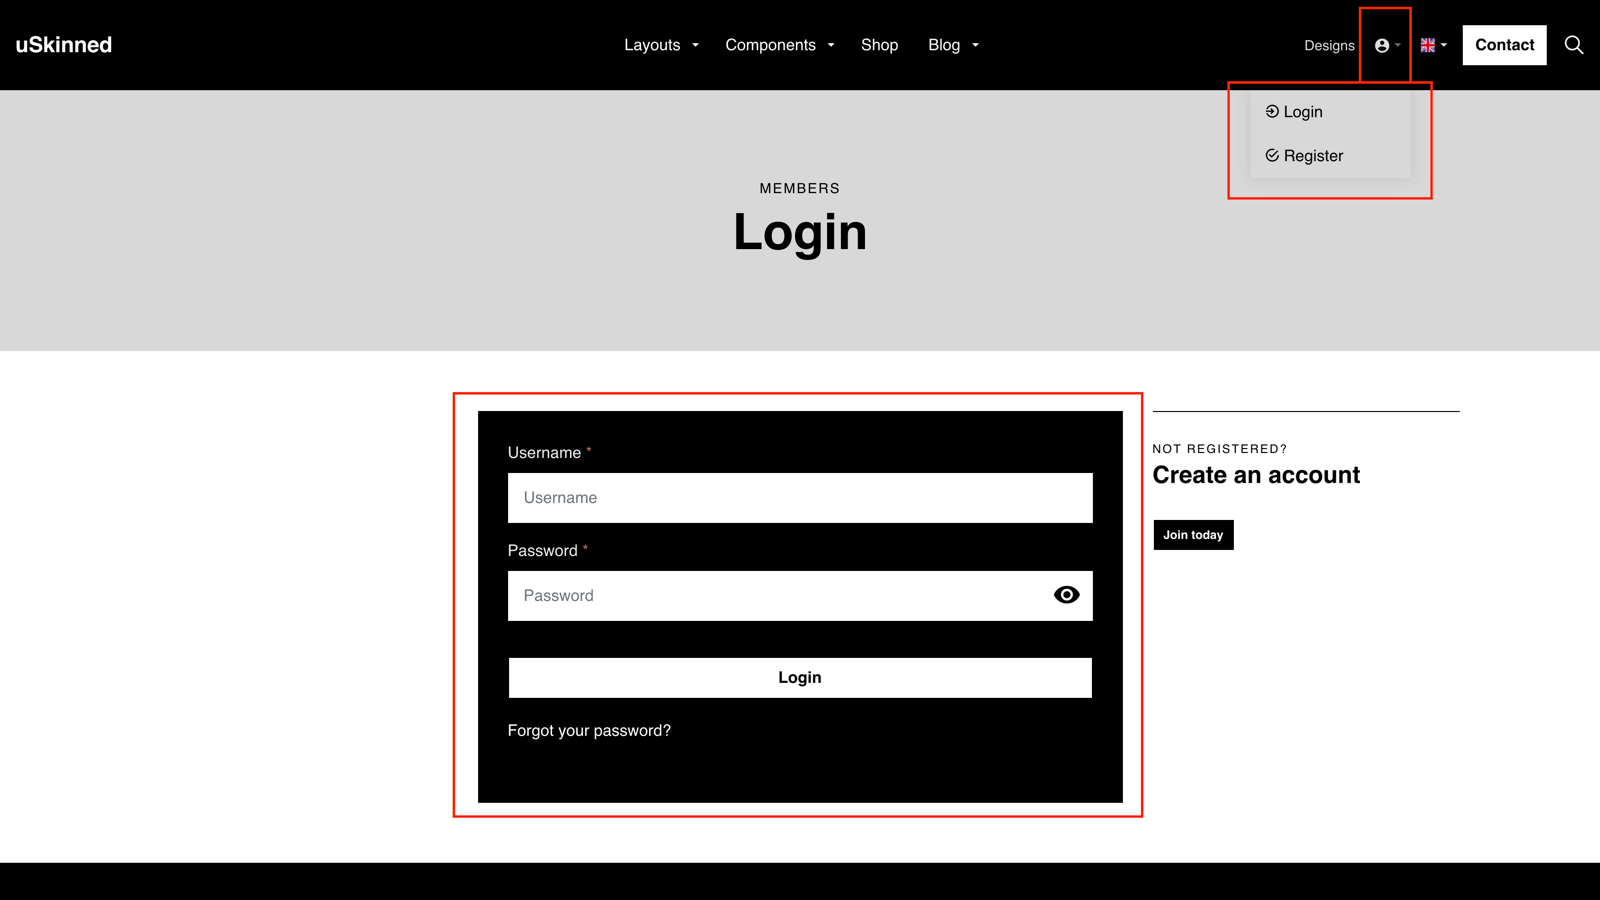 Login form for restricted content in uSkinned for Umbraco.